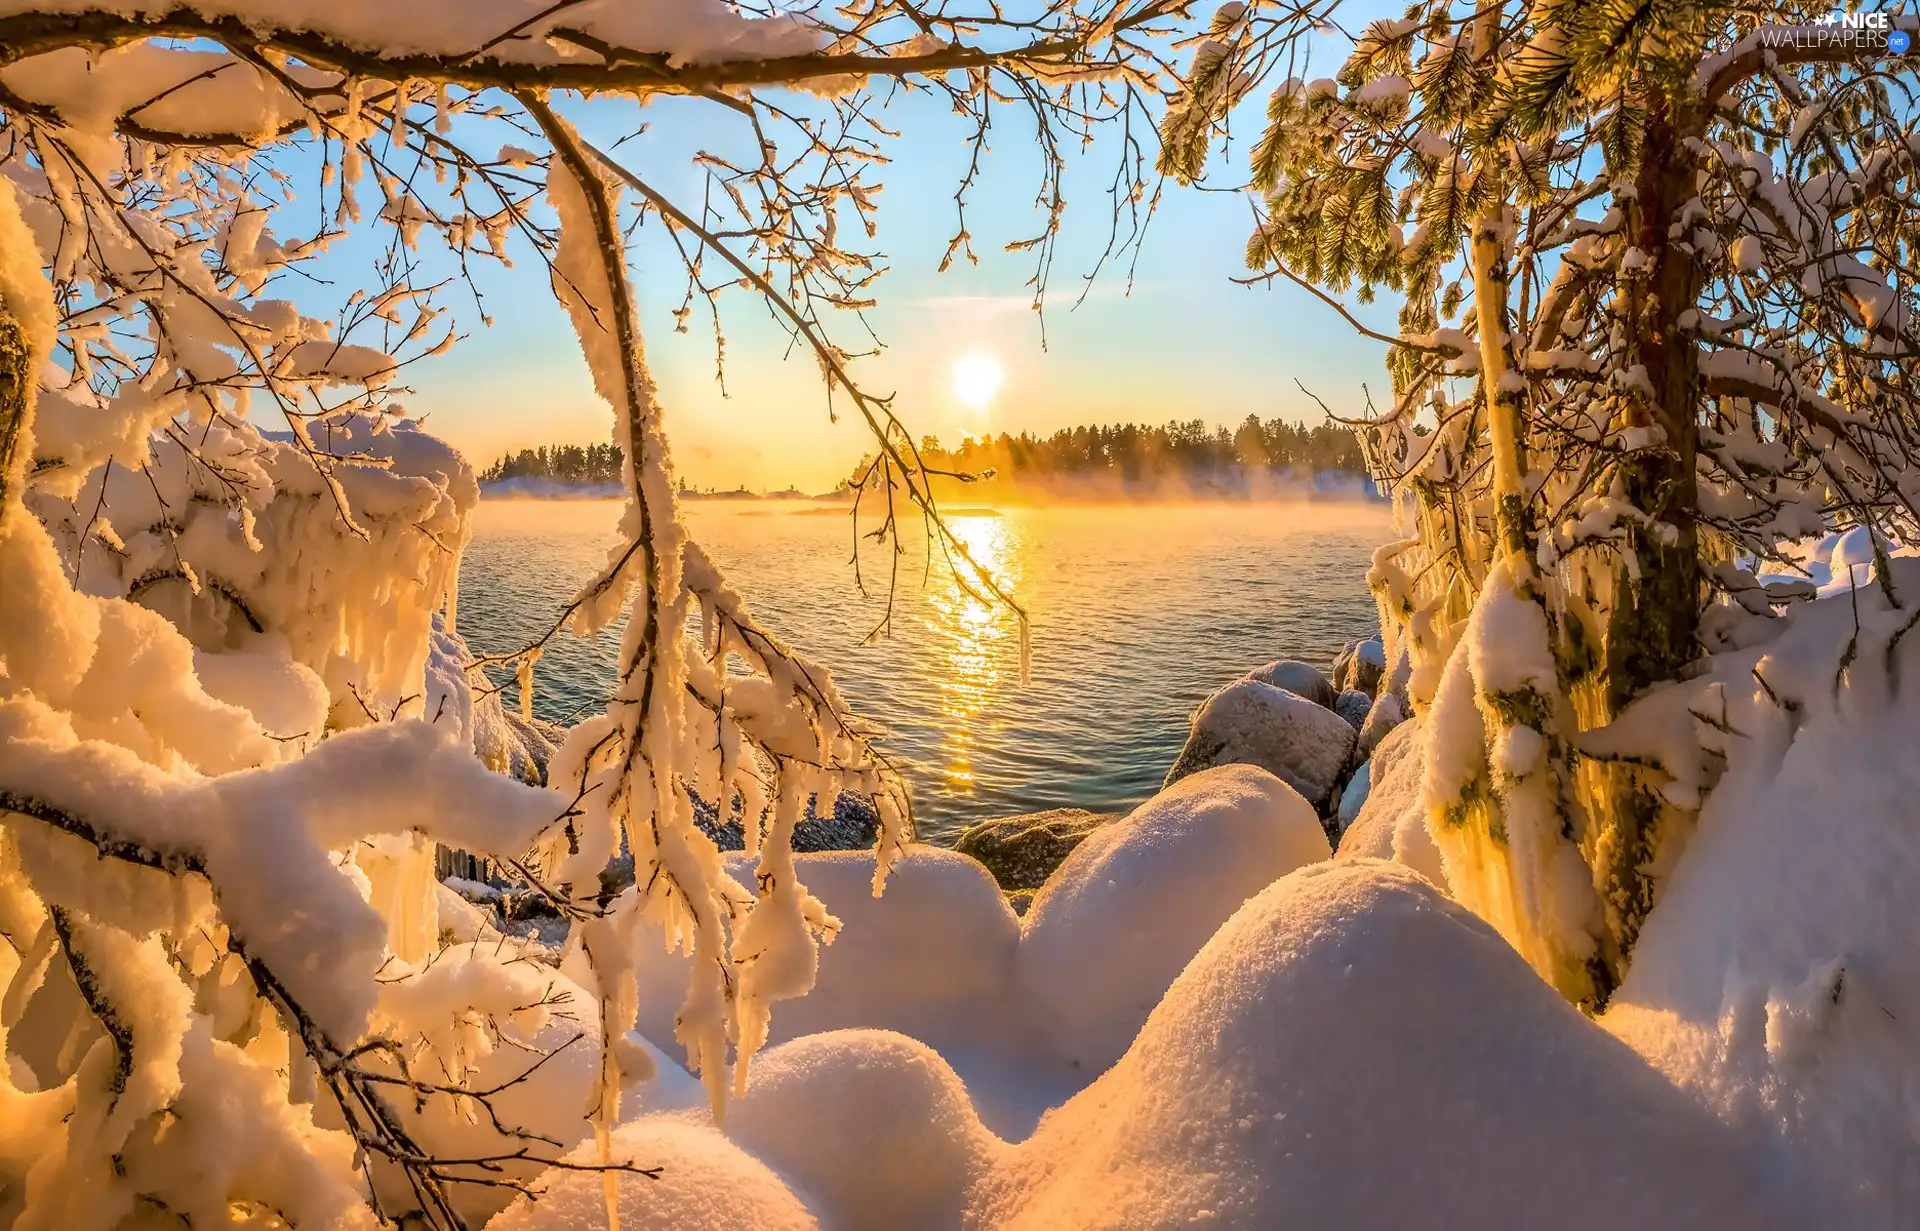 Great Sunsets, winter, Fog, forest, trees, branch pics, Snowy, lake, snow, viewes, Sky